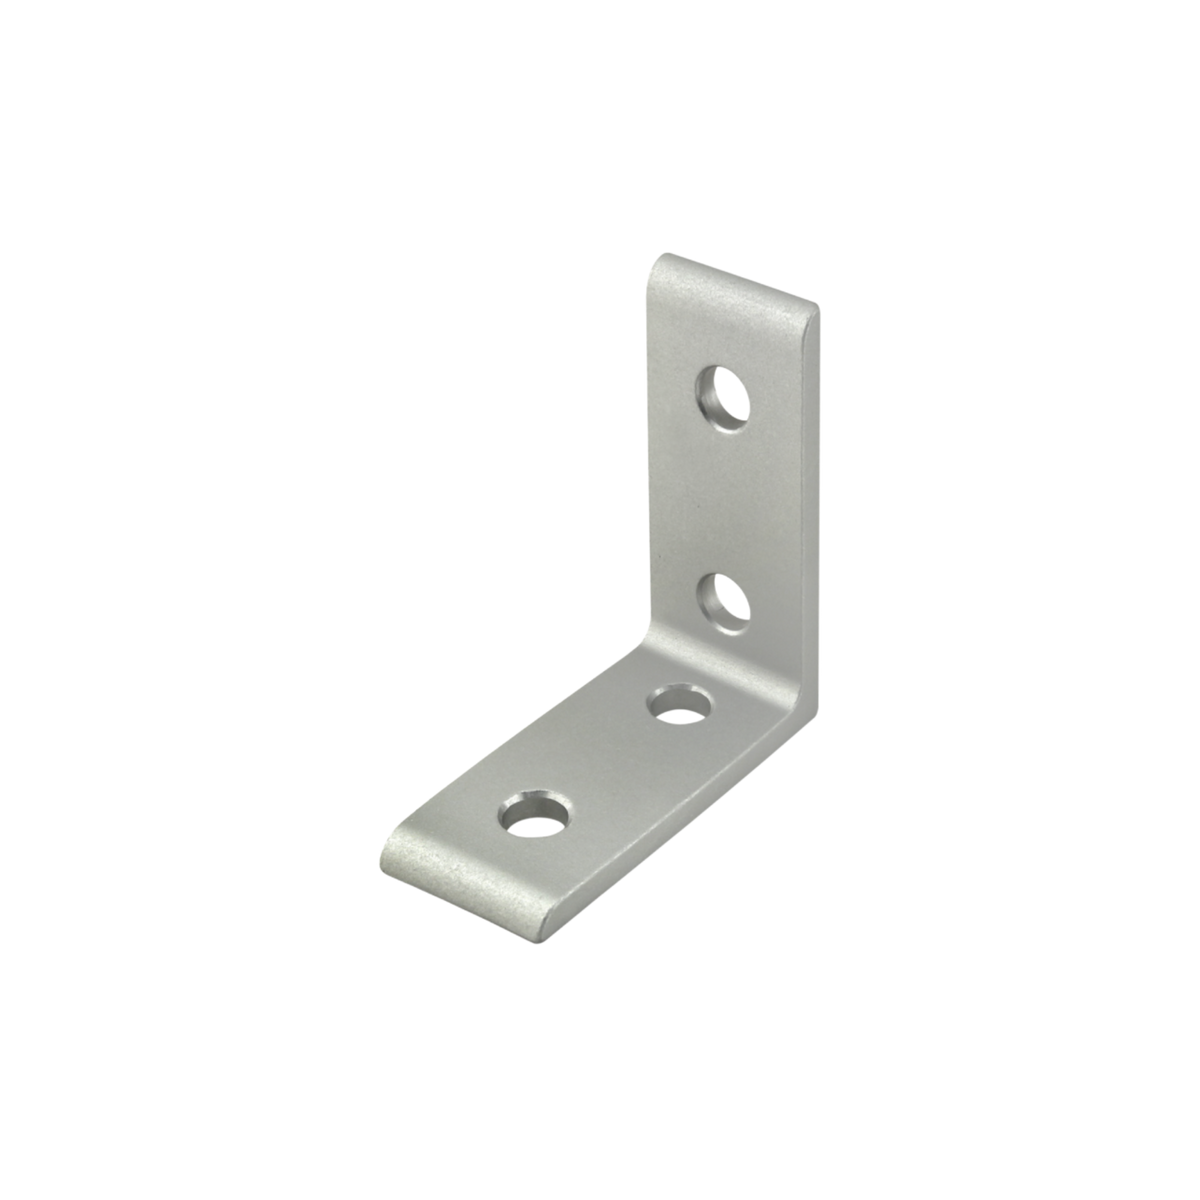 silver 90 degree corner bracket facing the left with two mounting holes on each side